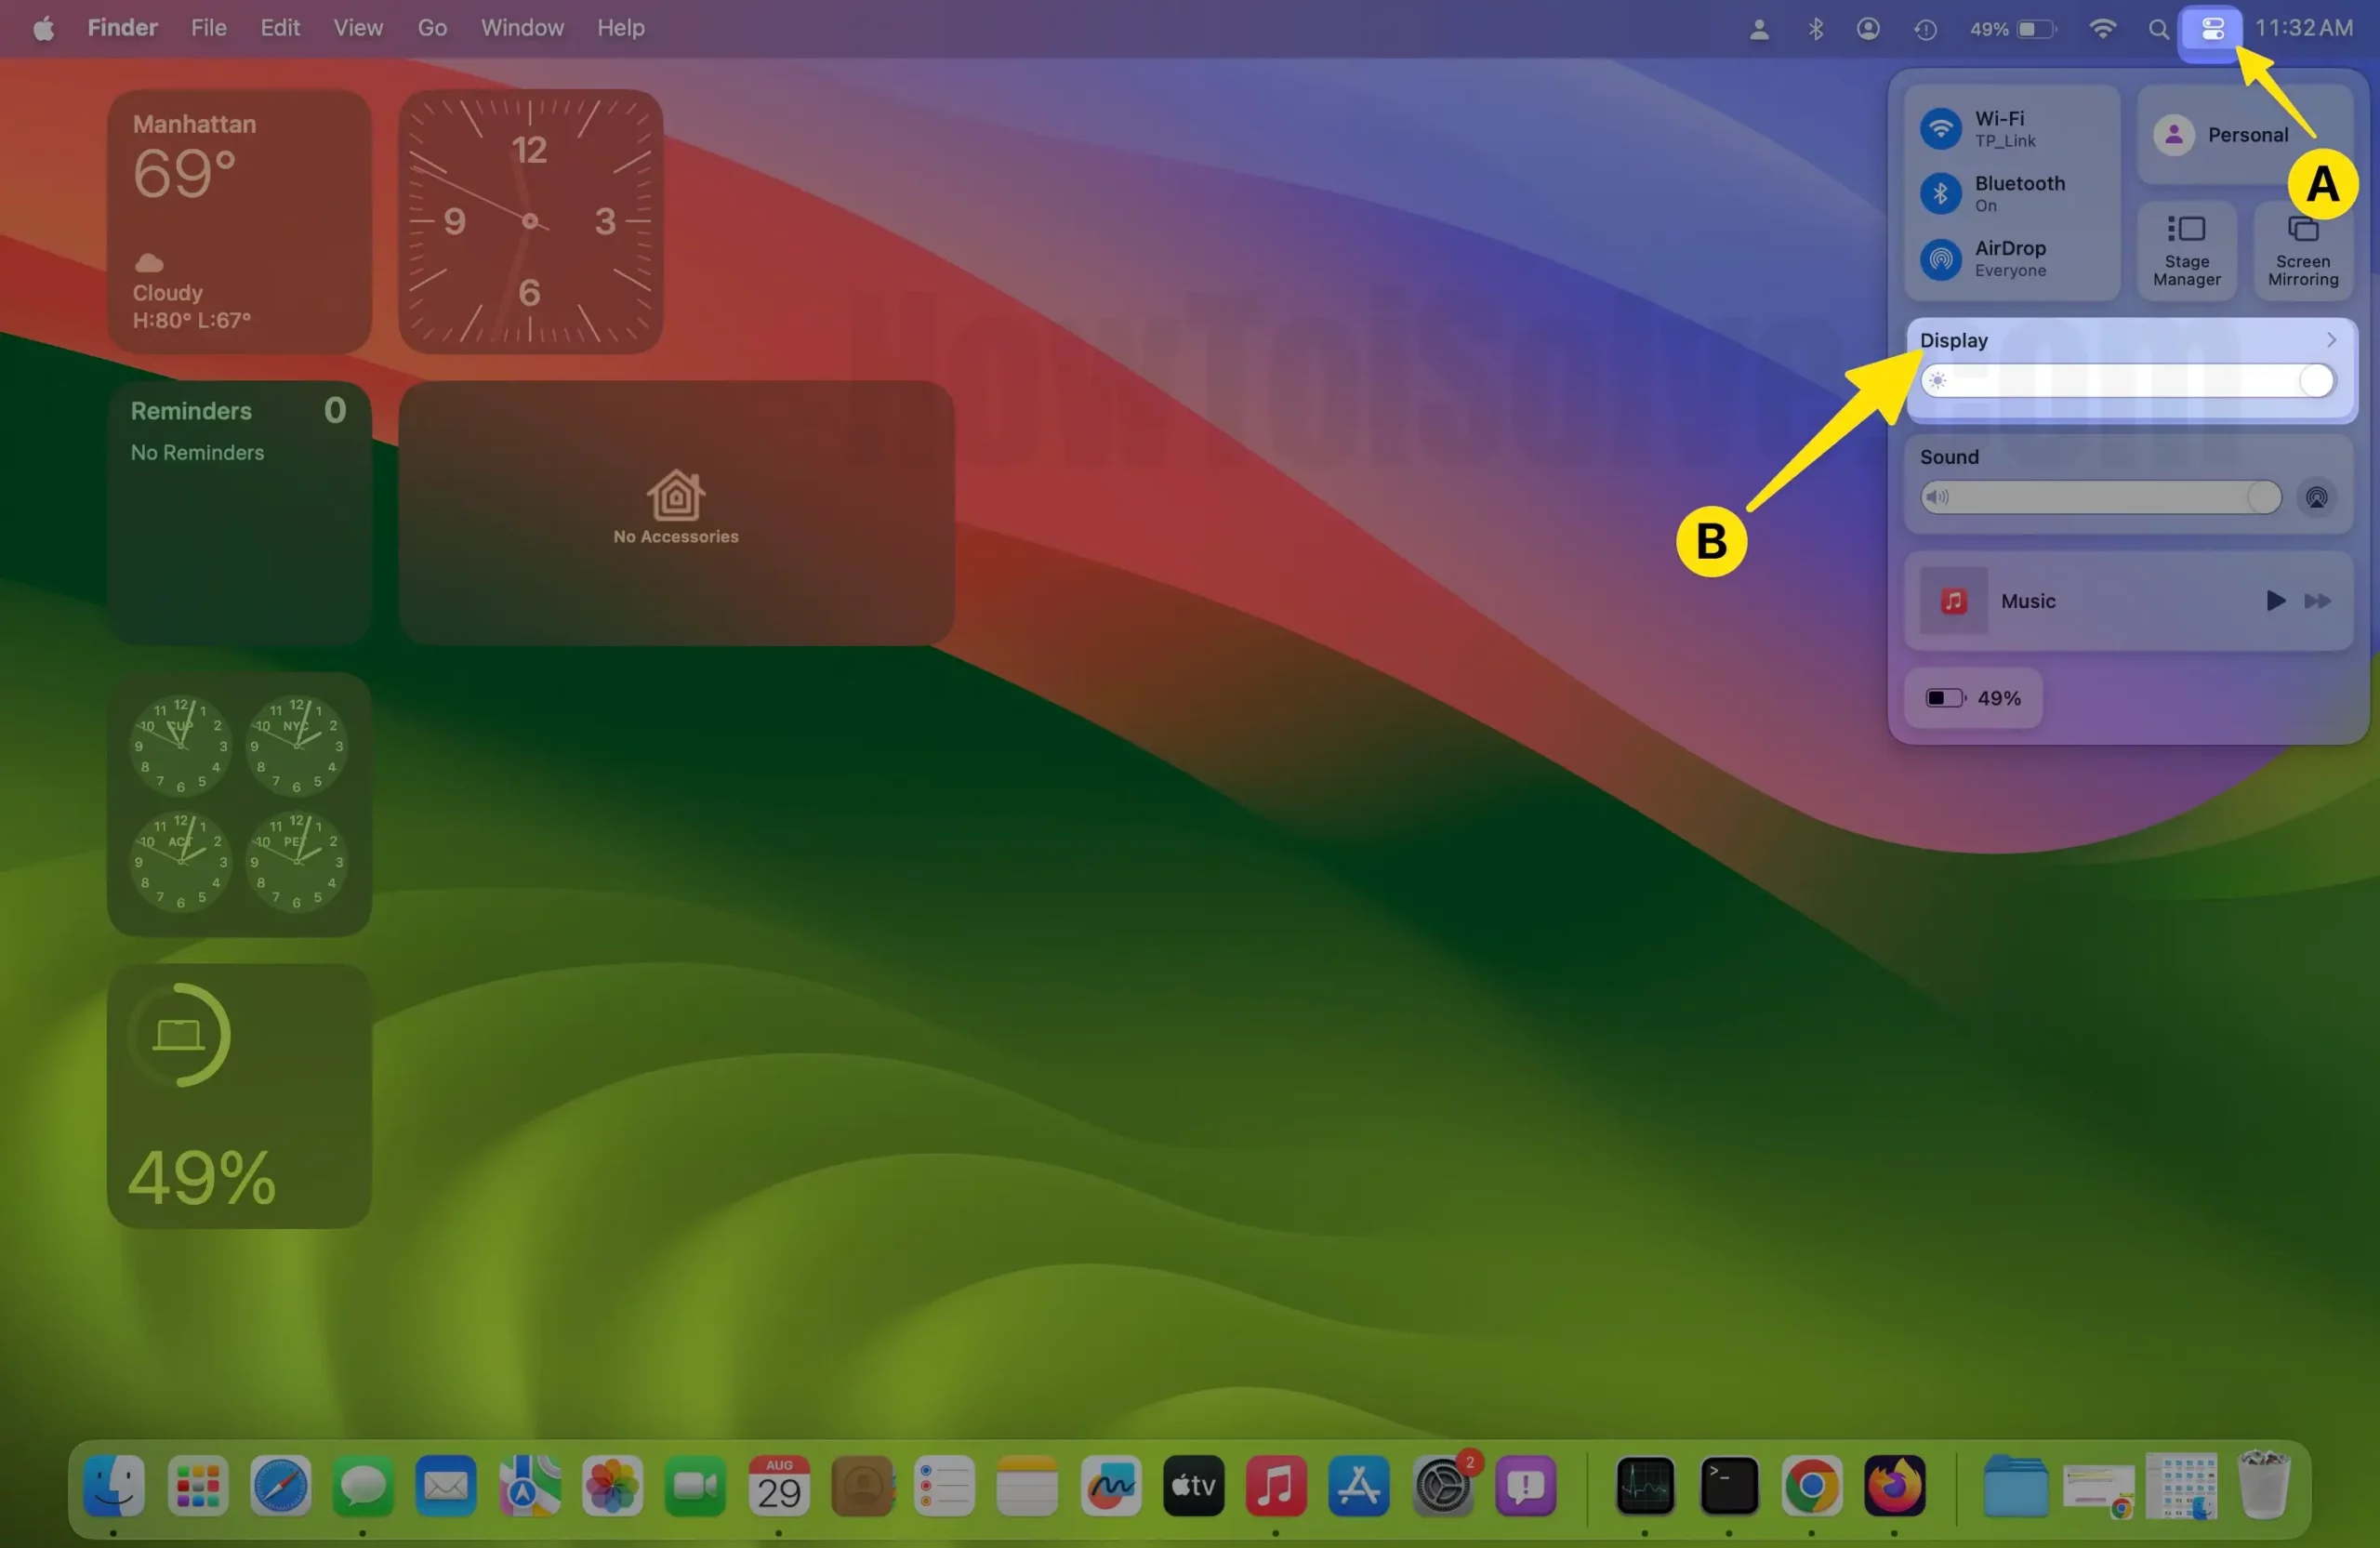 Open Display Settings from Control Center on Mac